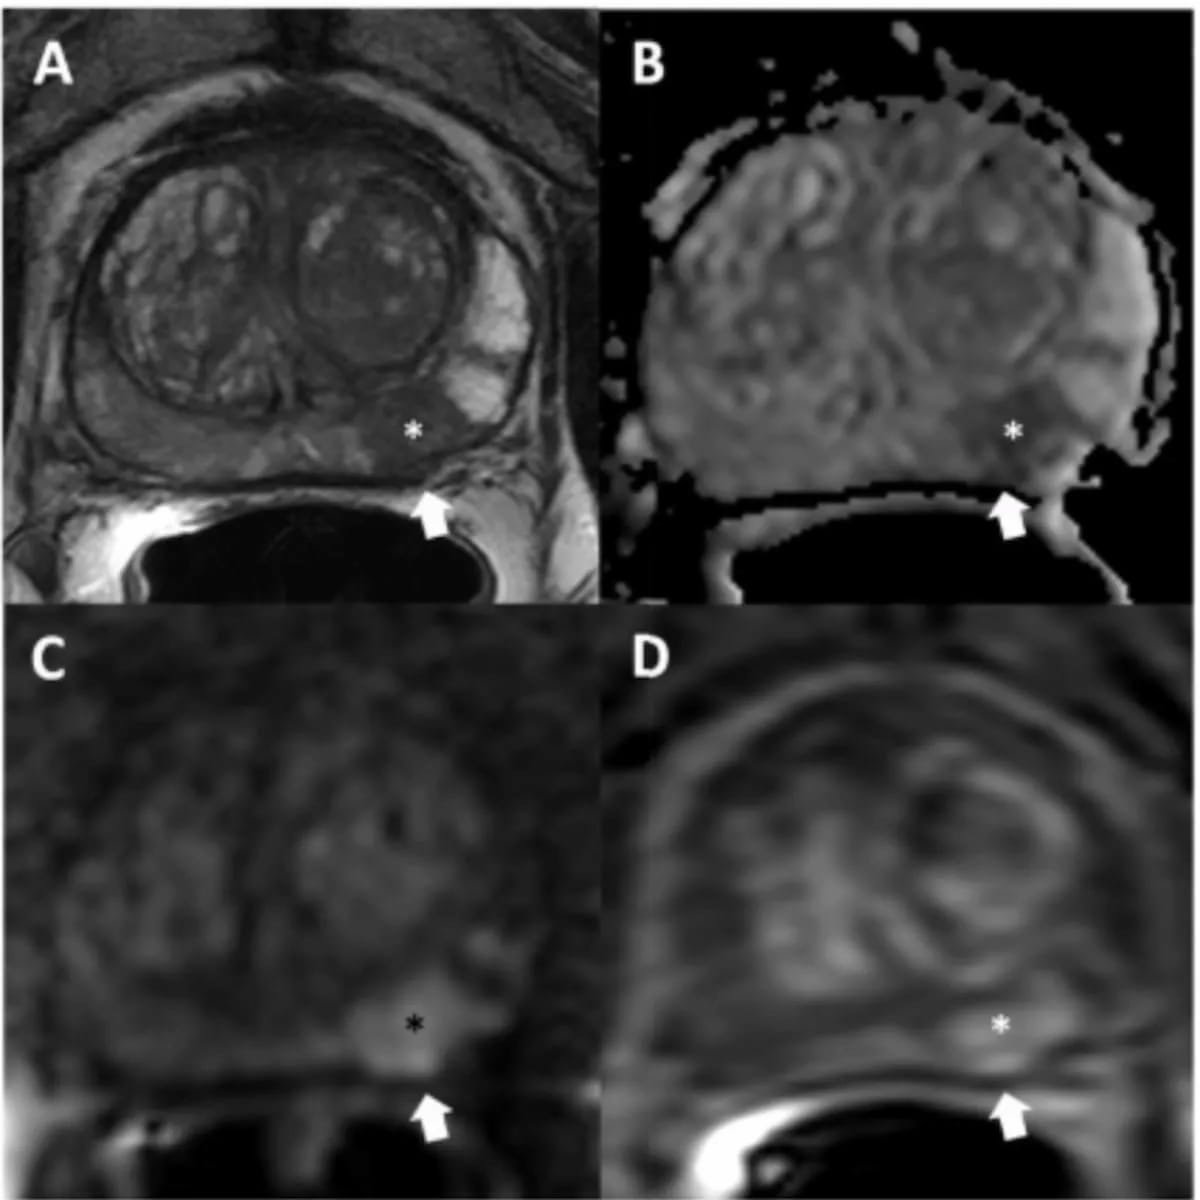 Predicting csPCa: Can a Prostate #MRI Point-Based Model Have an Impact? diagnosticimaging.com/view/predictin… @ACRRFS @ACRYPS @RadiologyACR @ARRS_Radiology @RSNA @SocietyAbdRad @StanfordRad @UofURadiology @UNMRadiology @UCSFimaging @UWRadiology @OHSURadiology #radiology #RadRes